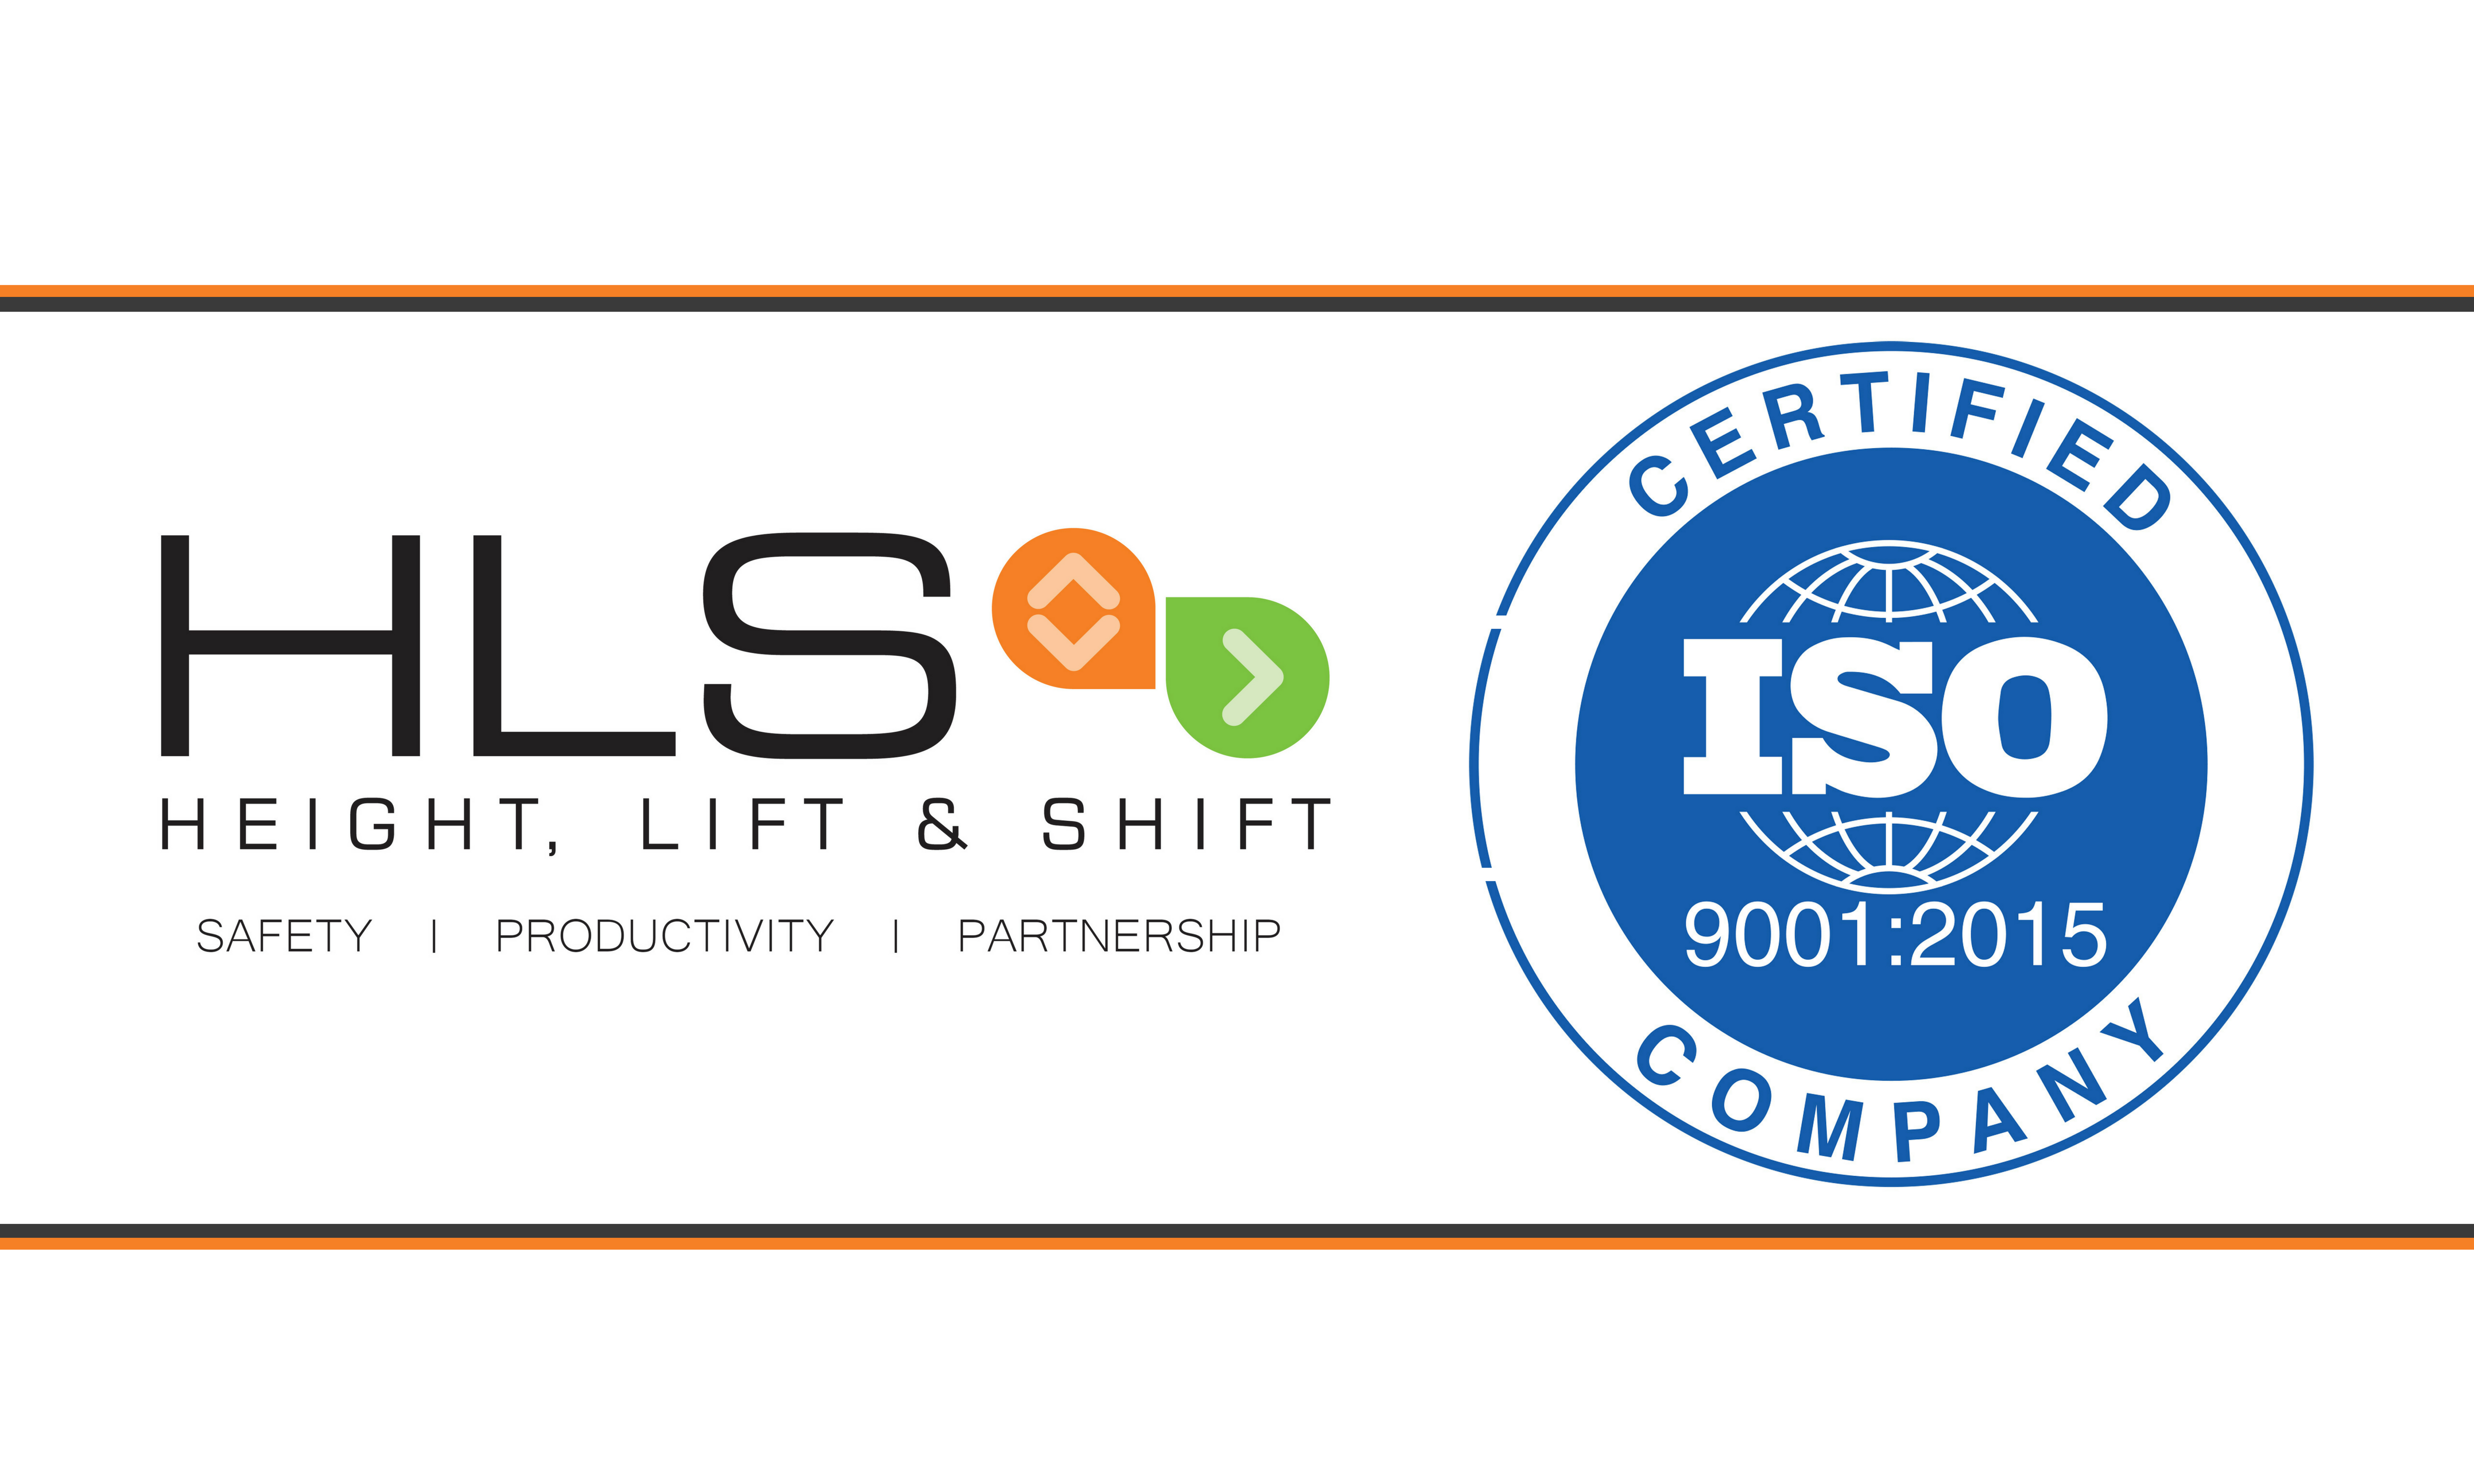 We Are ISO 9001:2015 Certified